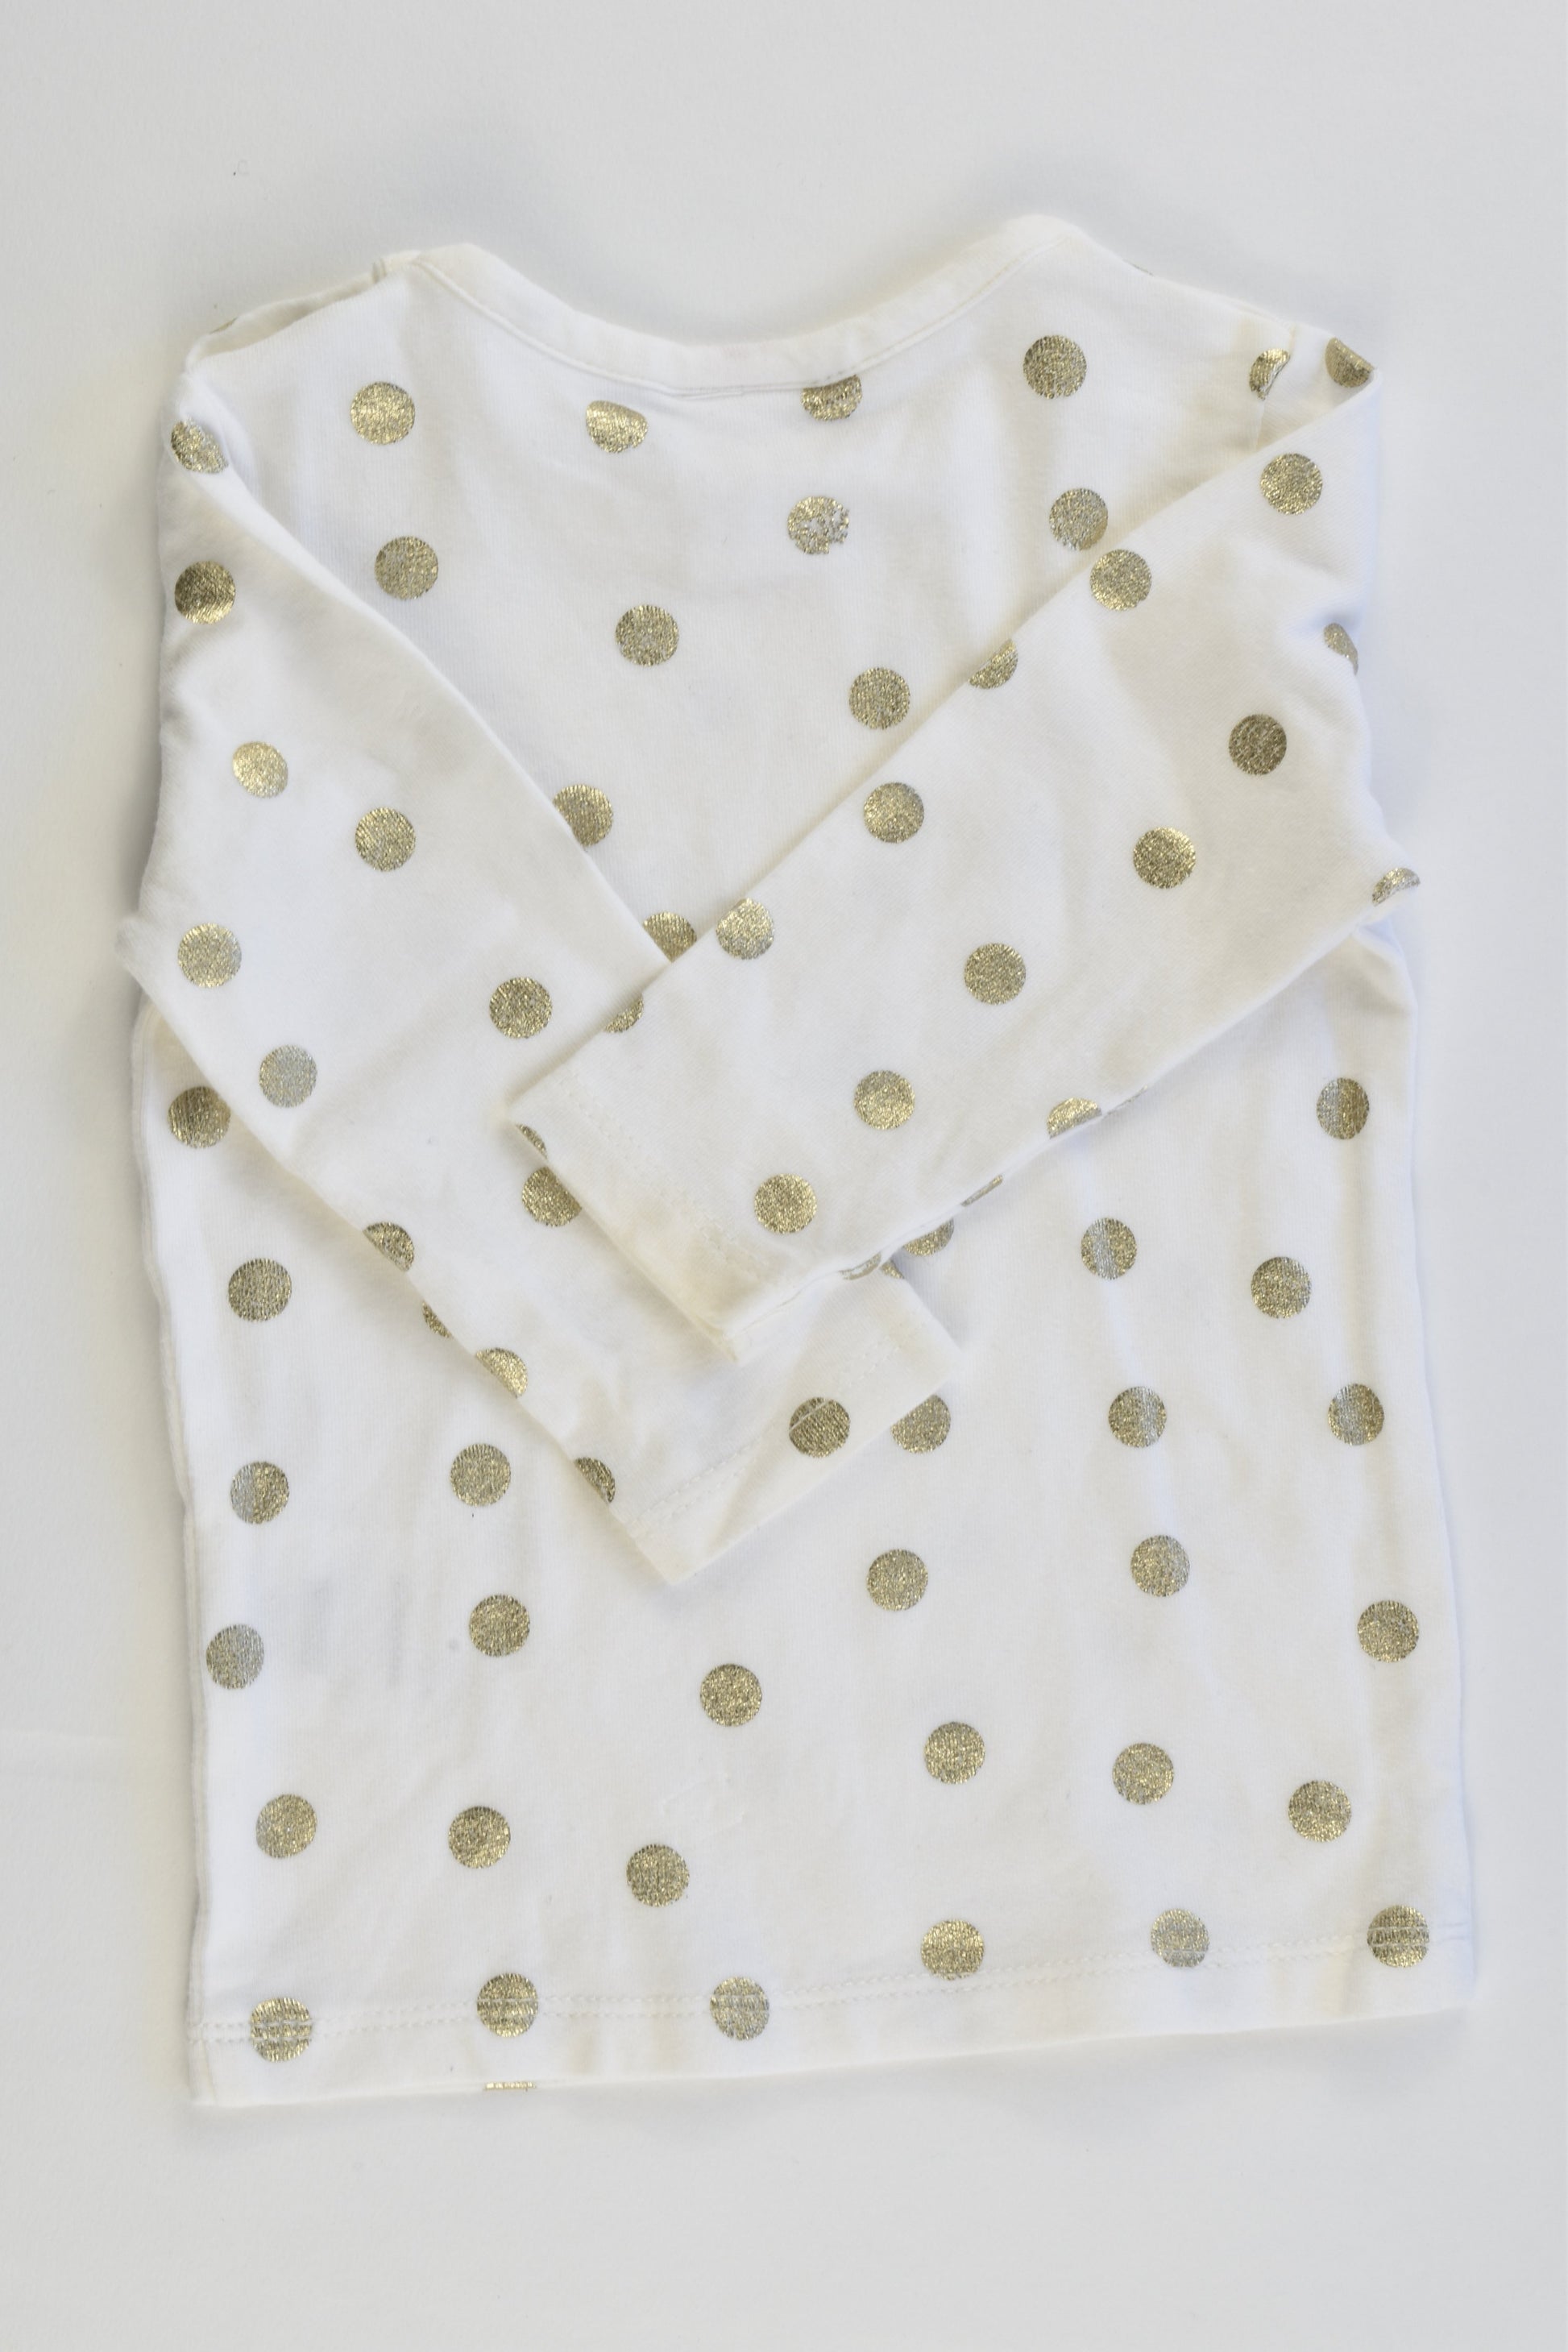 Seed Heritage Size 000 (0-3 months) Golden Polka Dots Top